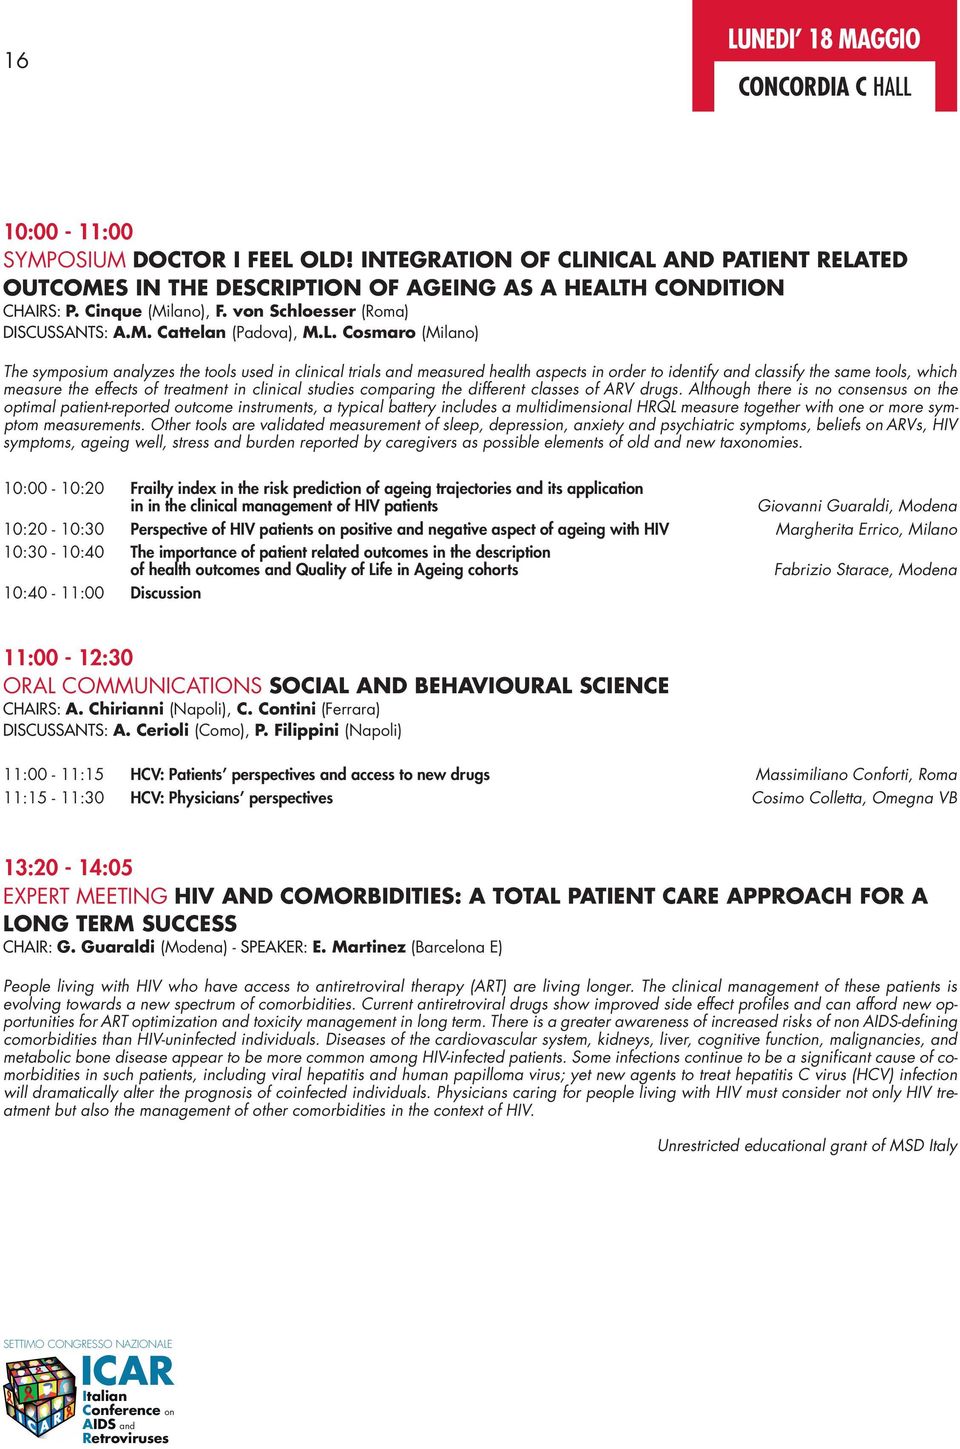 Cosmaro (Milano) The symposium analyzes the tools used in clinical trials and measured health aspects in order to identify and classify the same tools, which measure the effects of treatment in